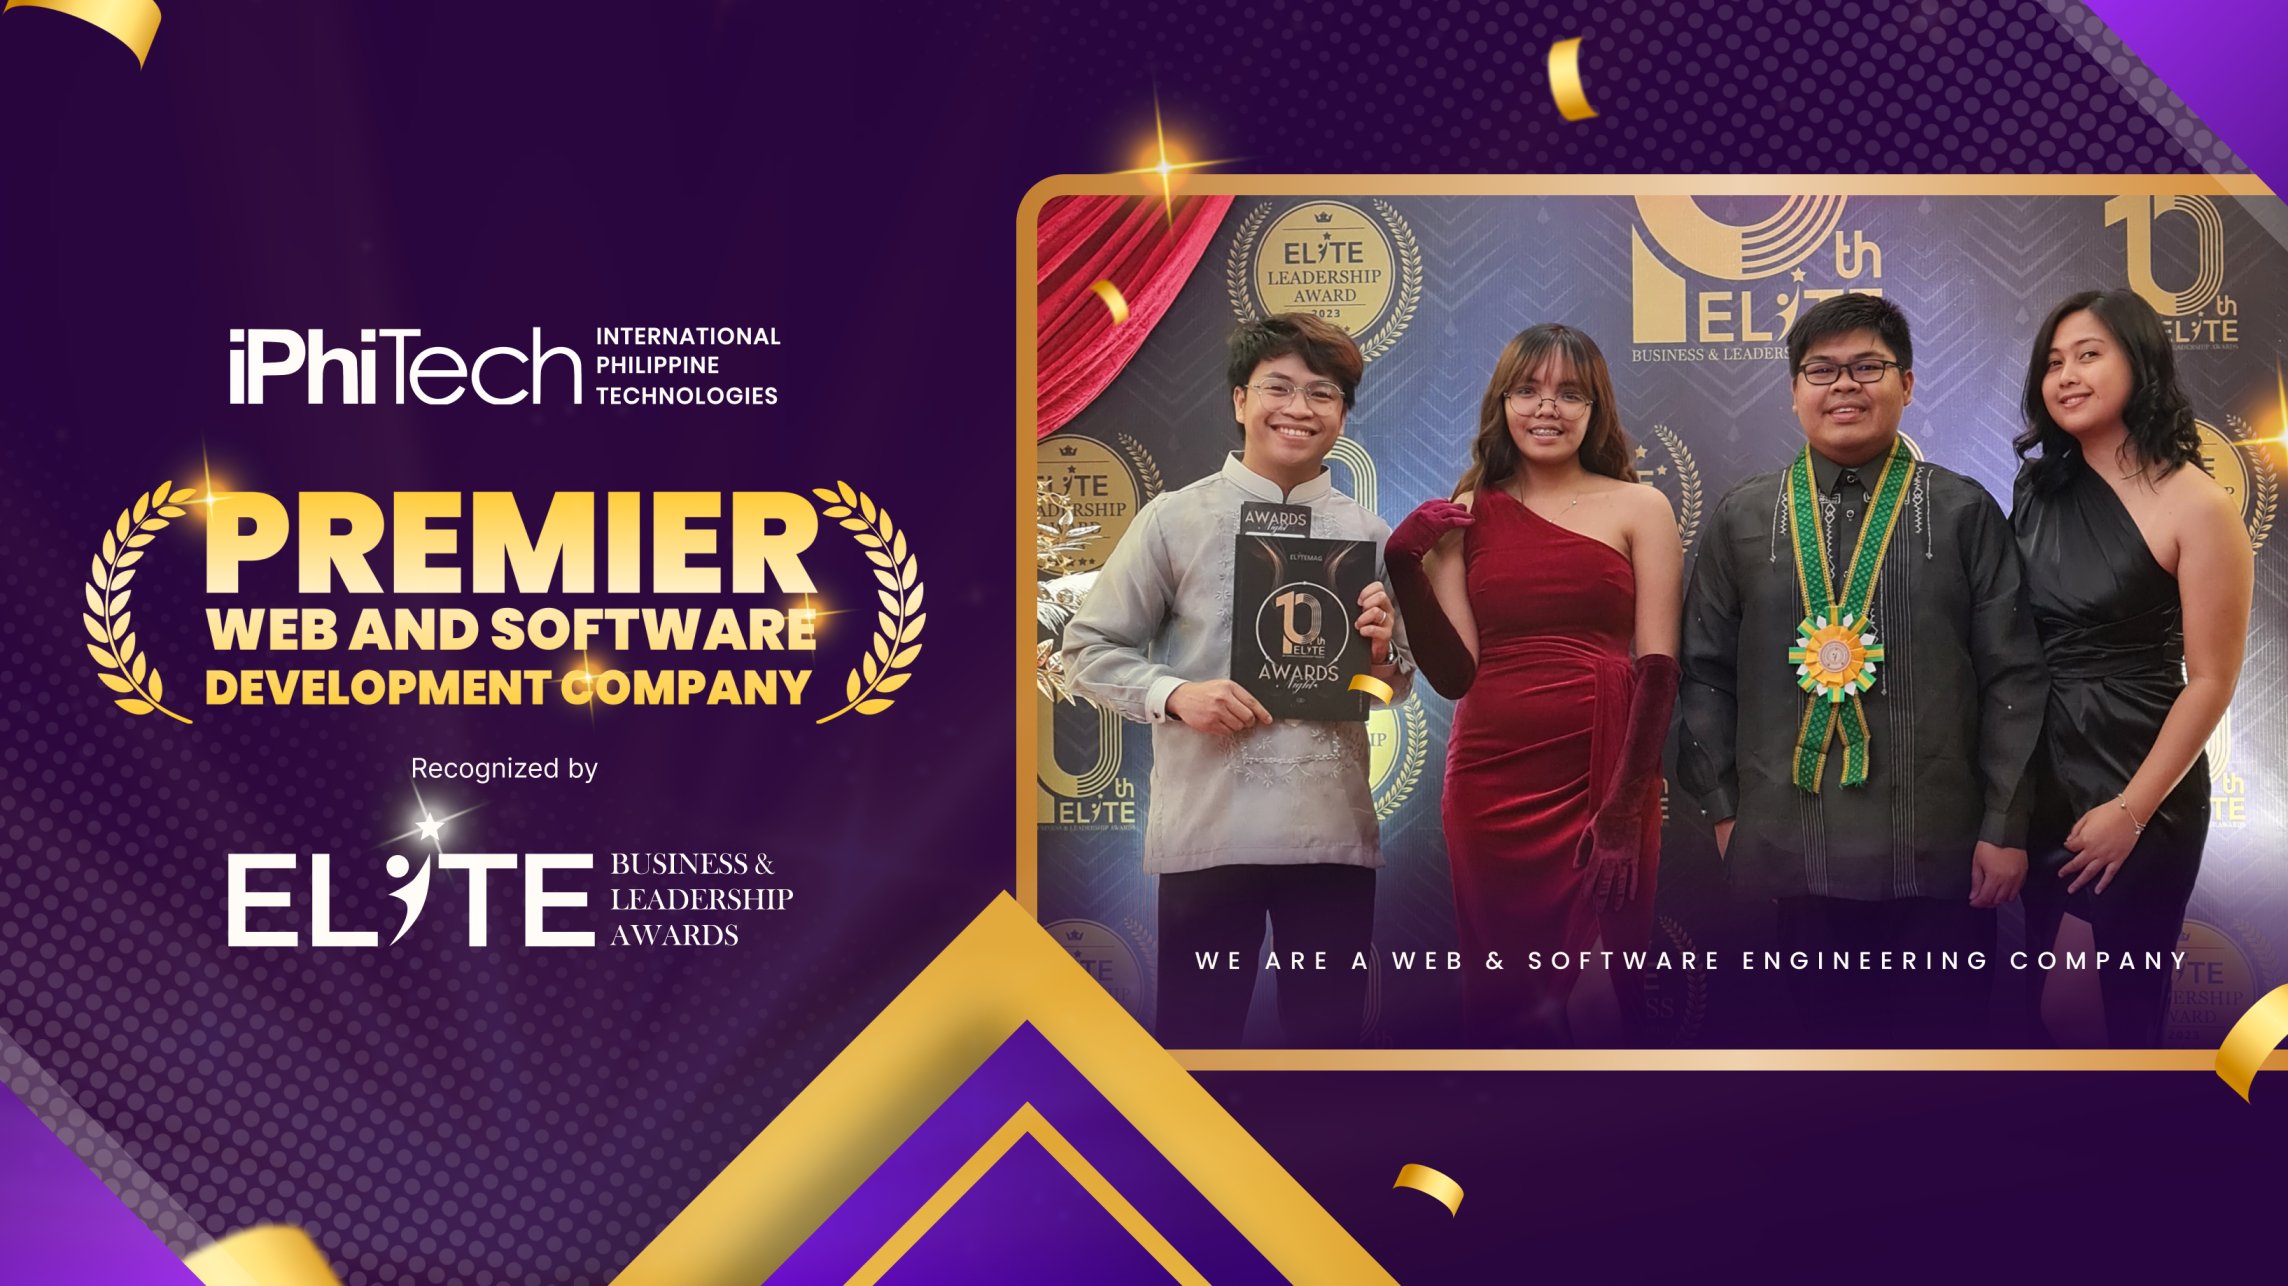 iPhitech representatives received the Premier Web and Software Company Award by Elite Business and Leadership Awards 2023.